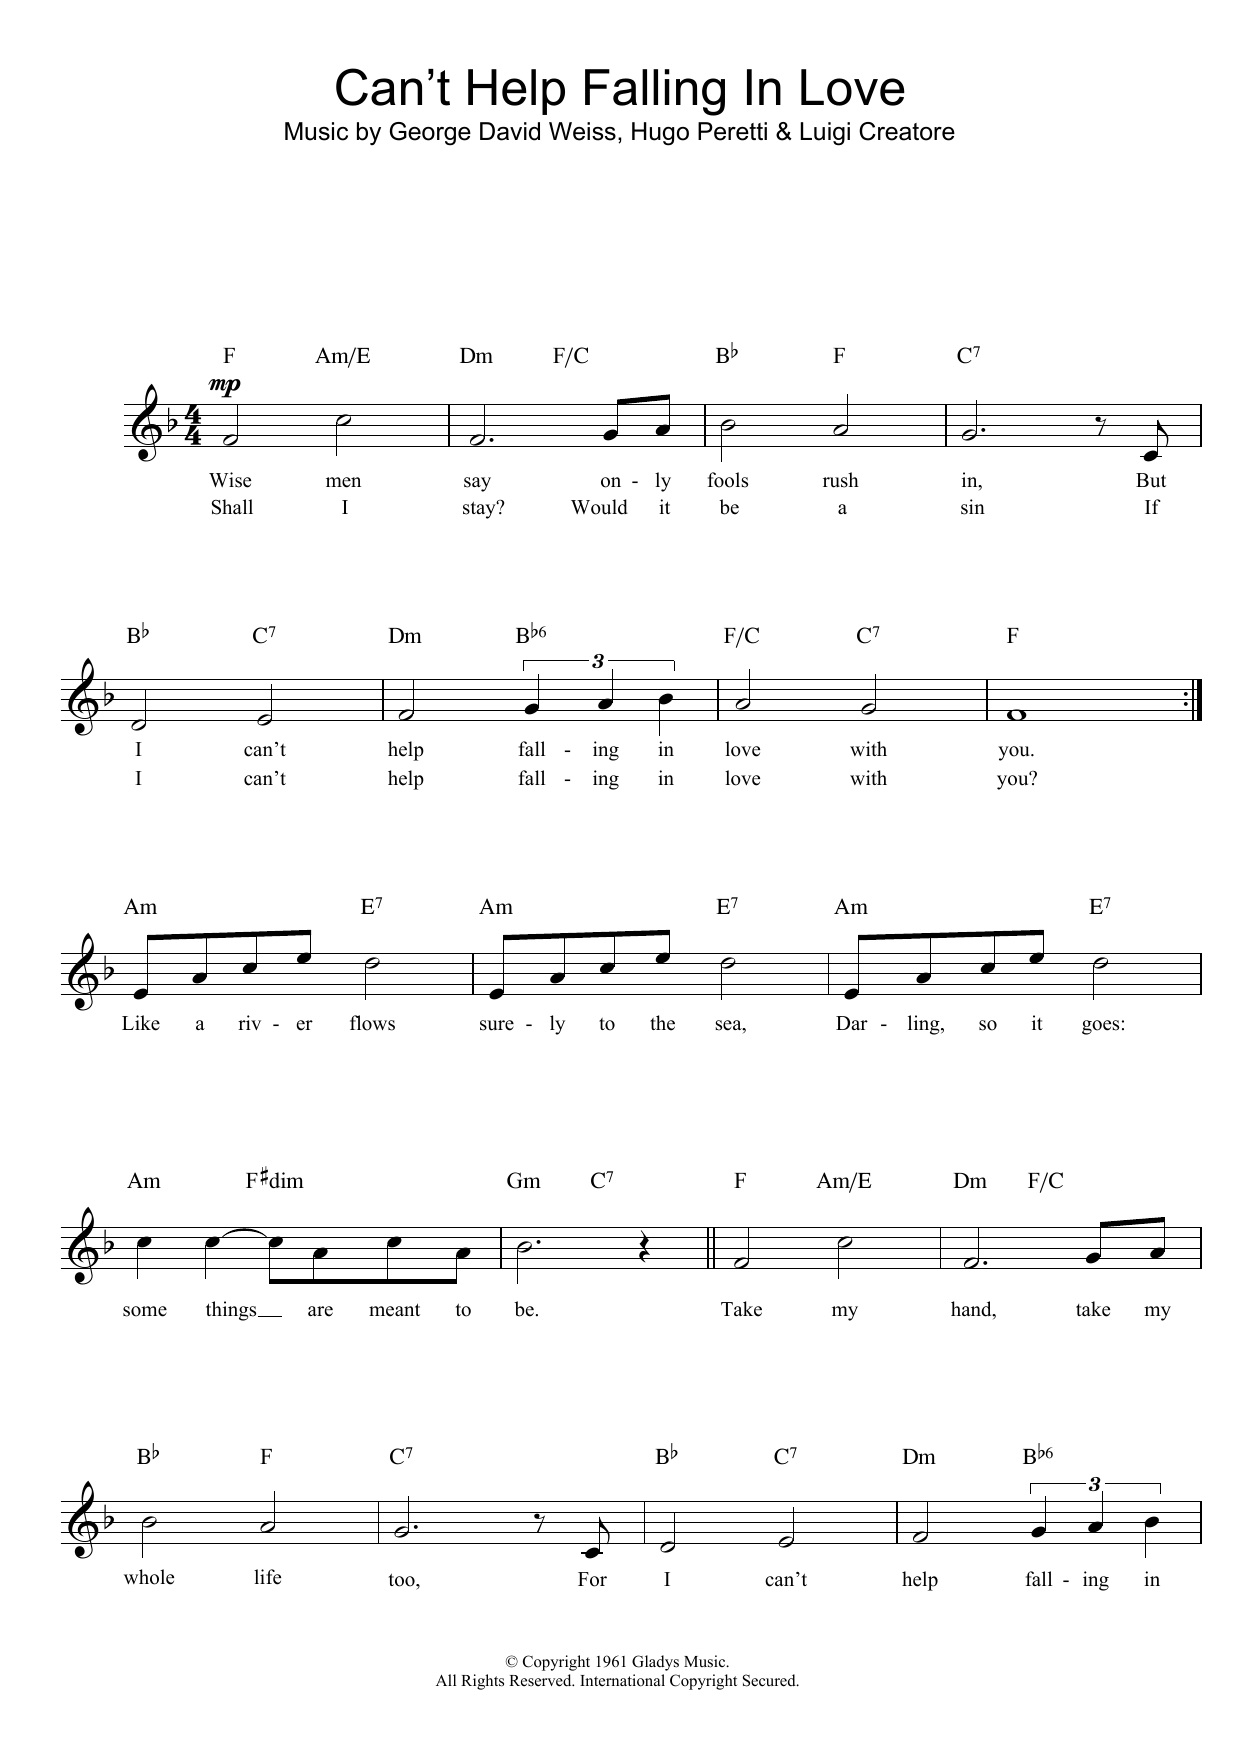 UB40 Can't Help Falling In Love sheet music notes and chords. Download Printable PDF.